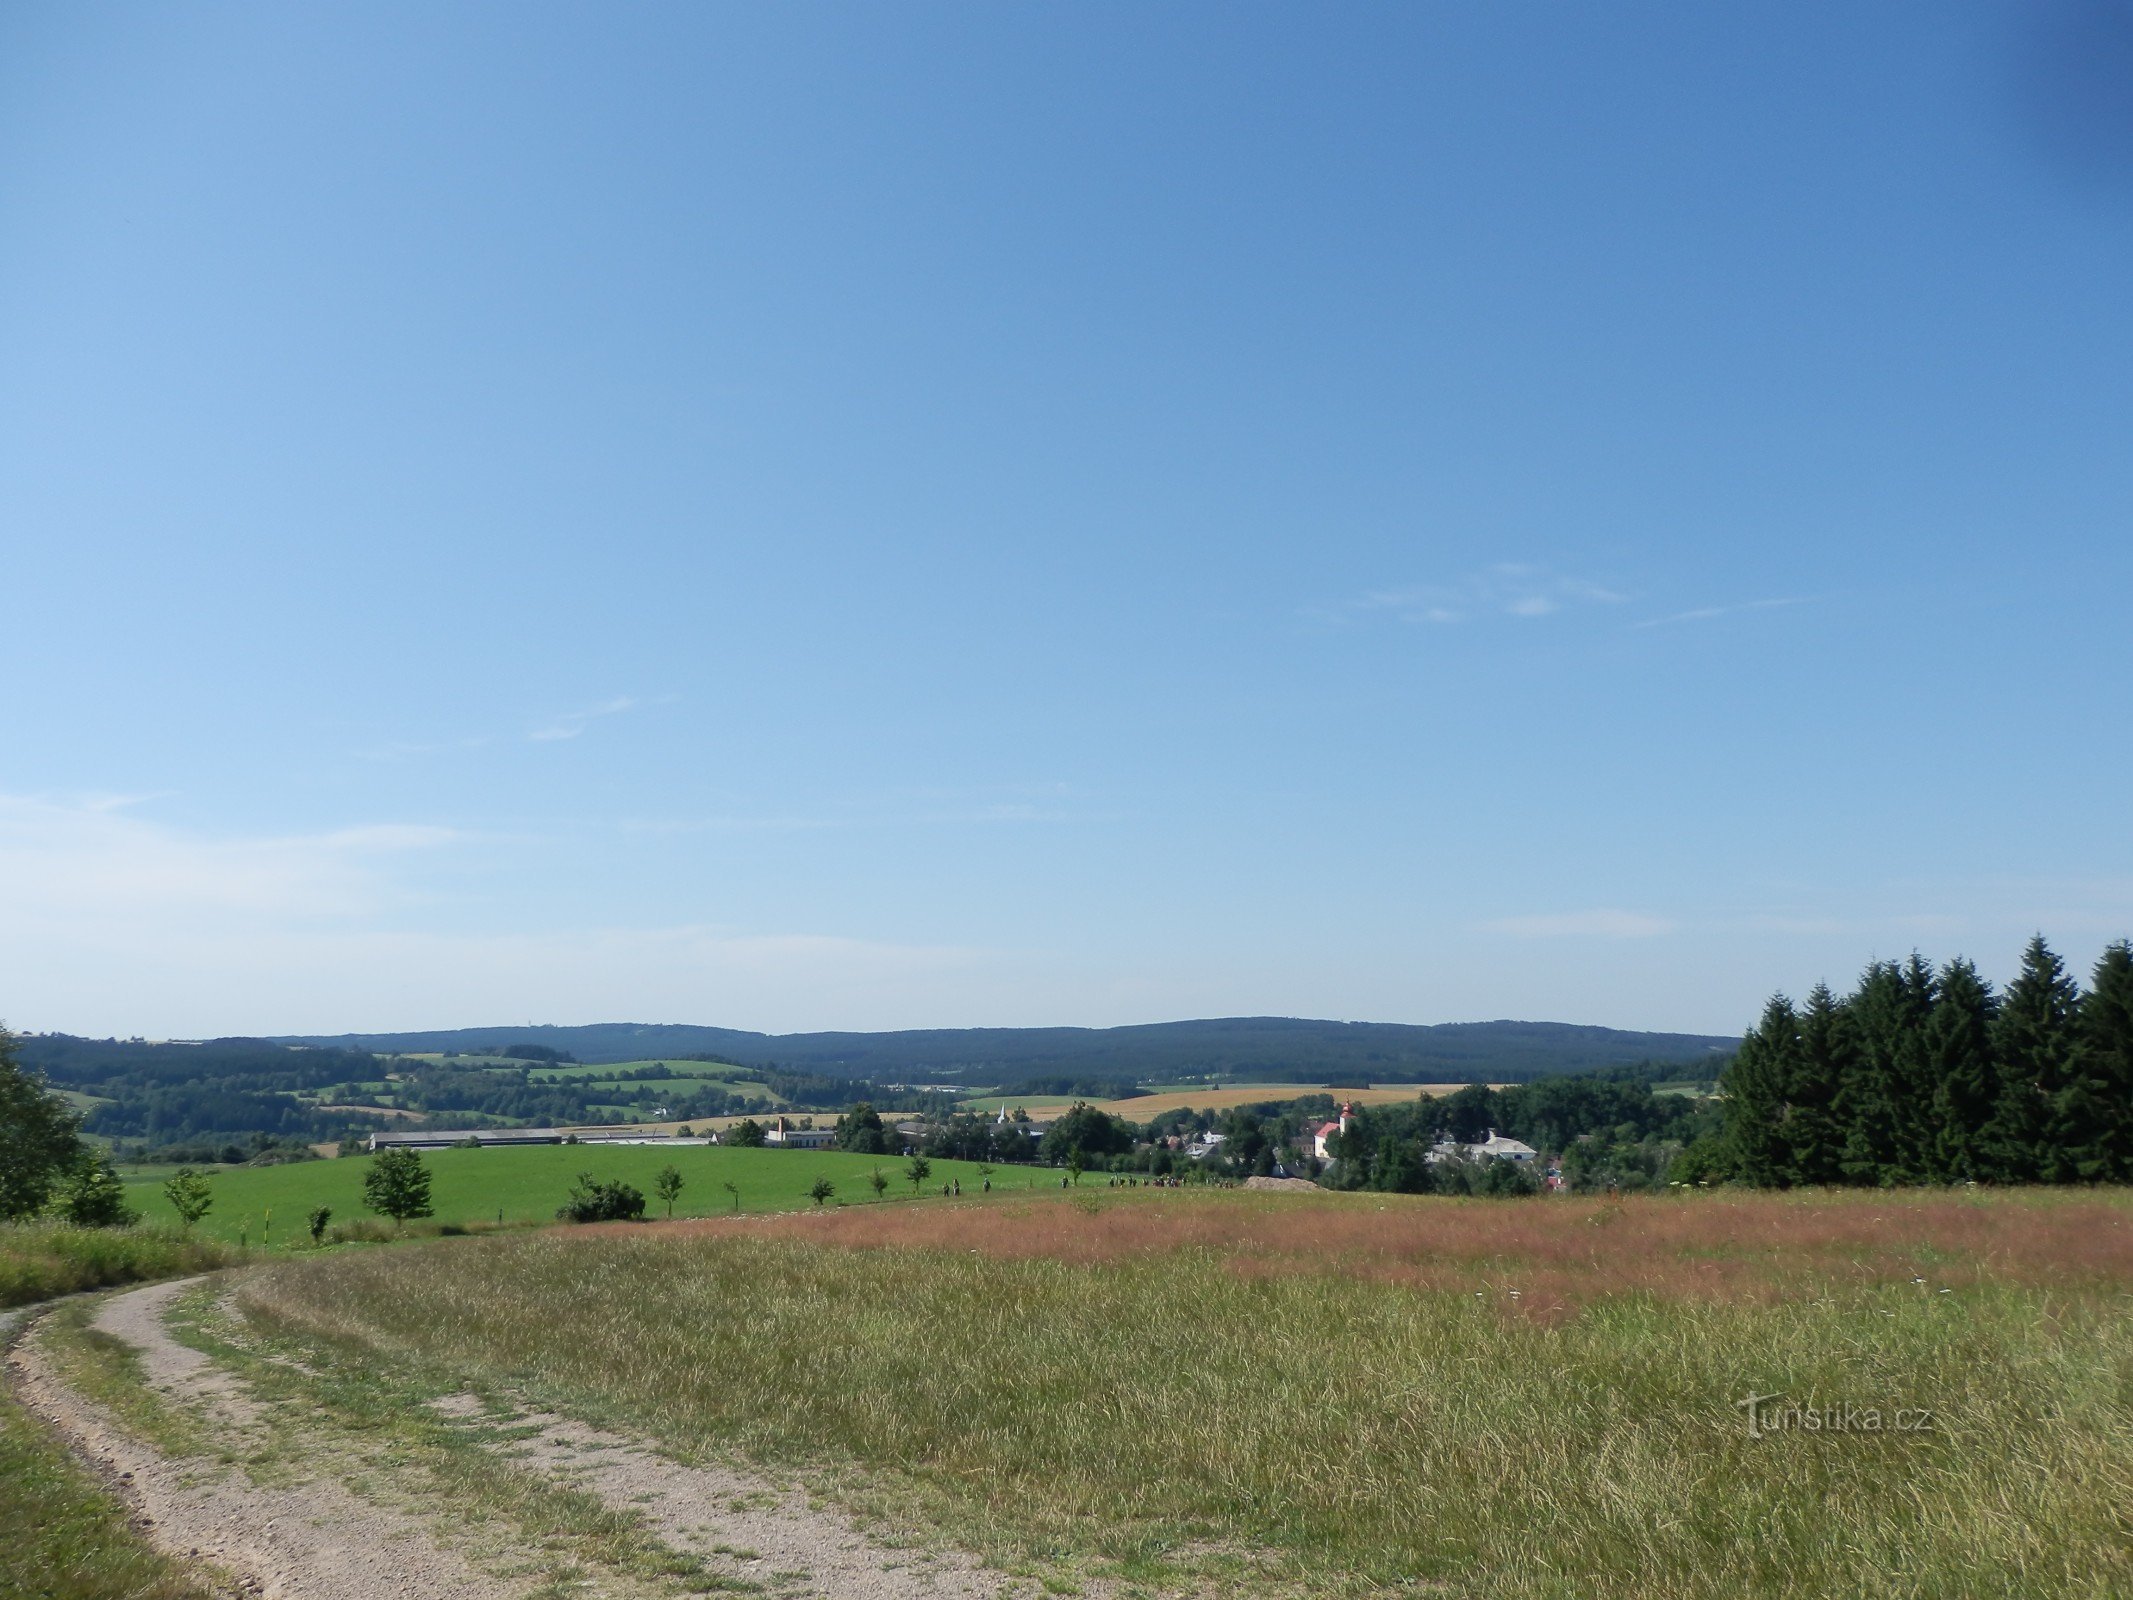 on the way to Buchtů hill